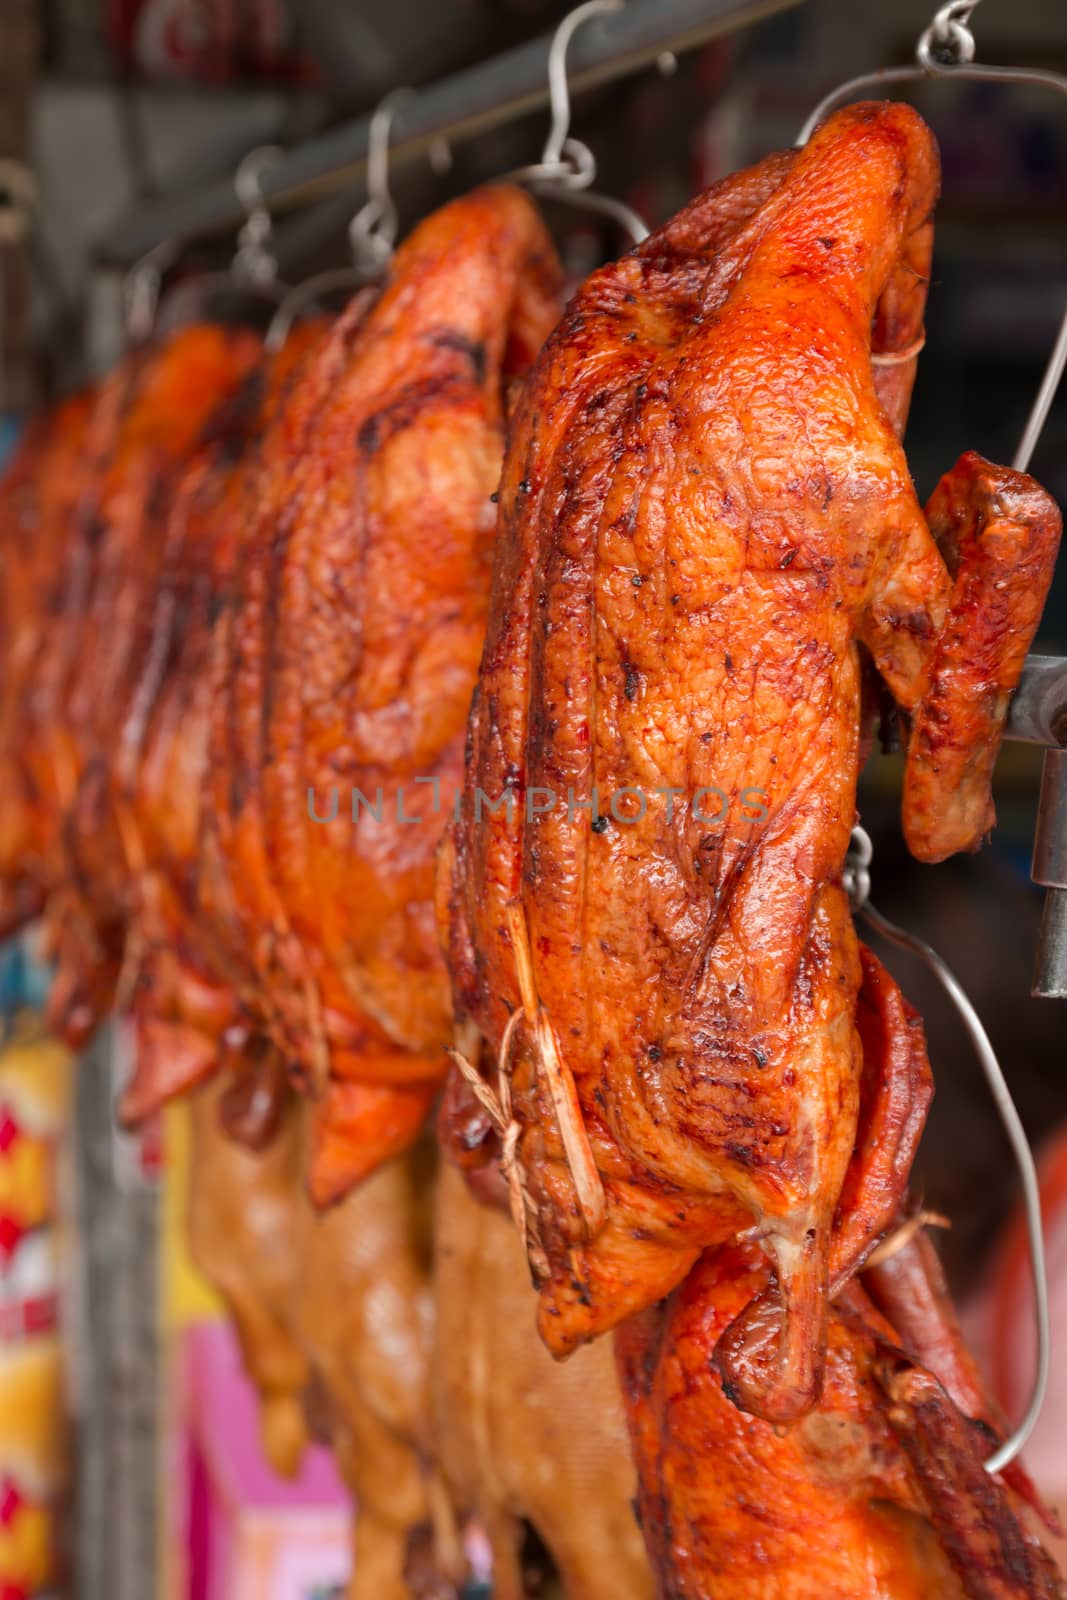 Roasted duck on the markets. by lavoview